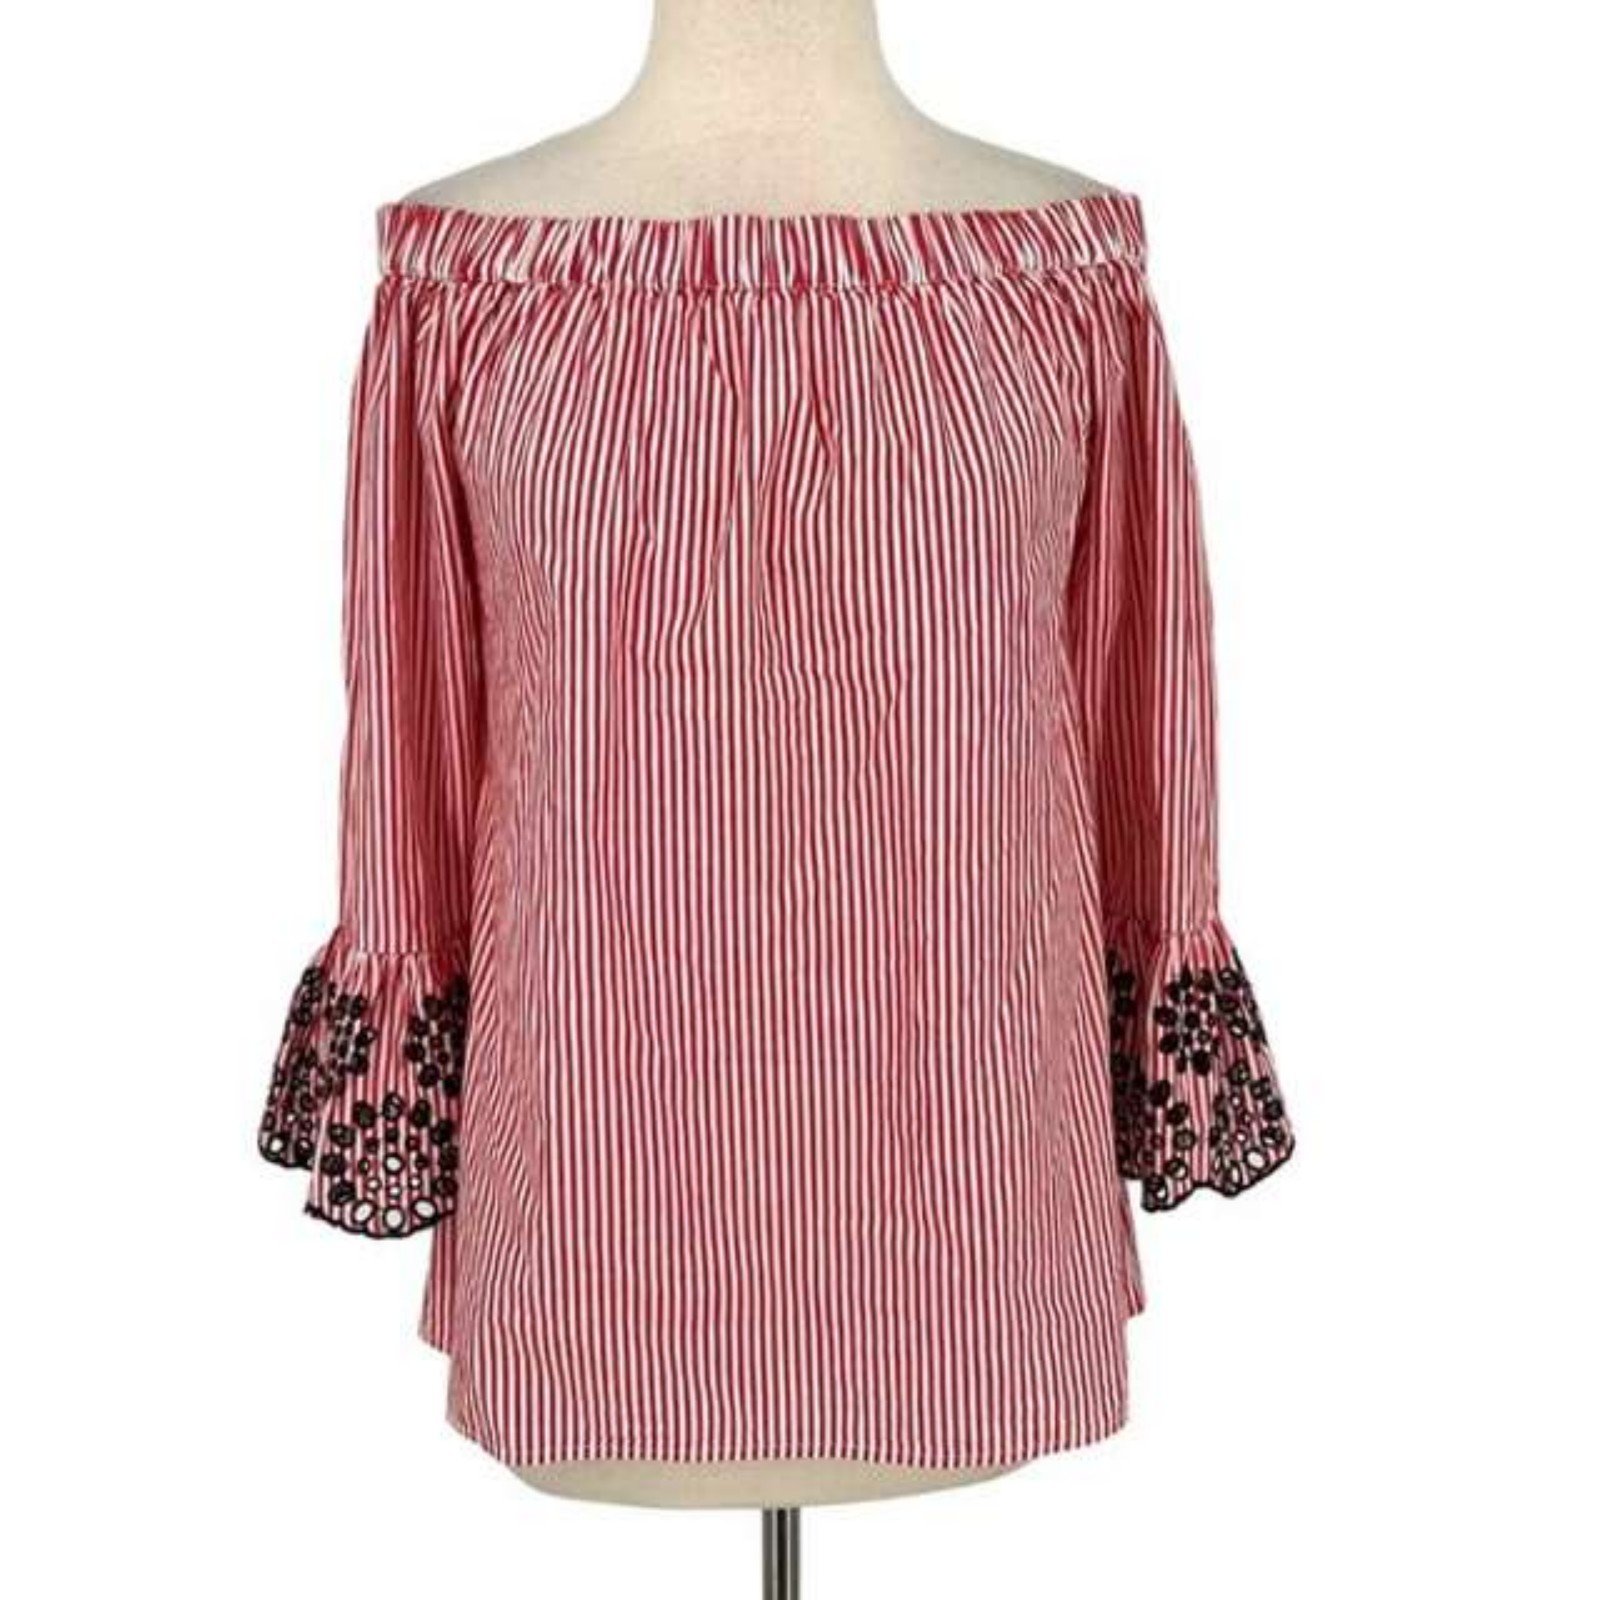 Wholesale price Beach Lunch Lounge Red white Boho Striped Off Shoulder Top Bell Sleeves Sz S n1CXtRL5N Discount